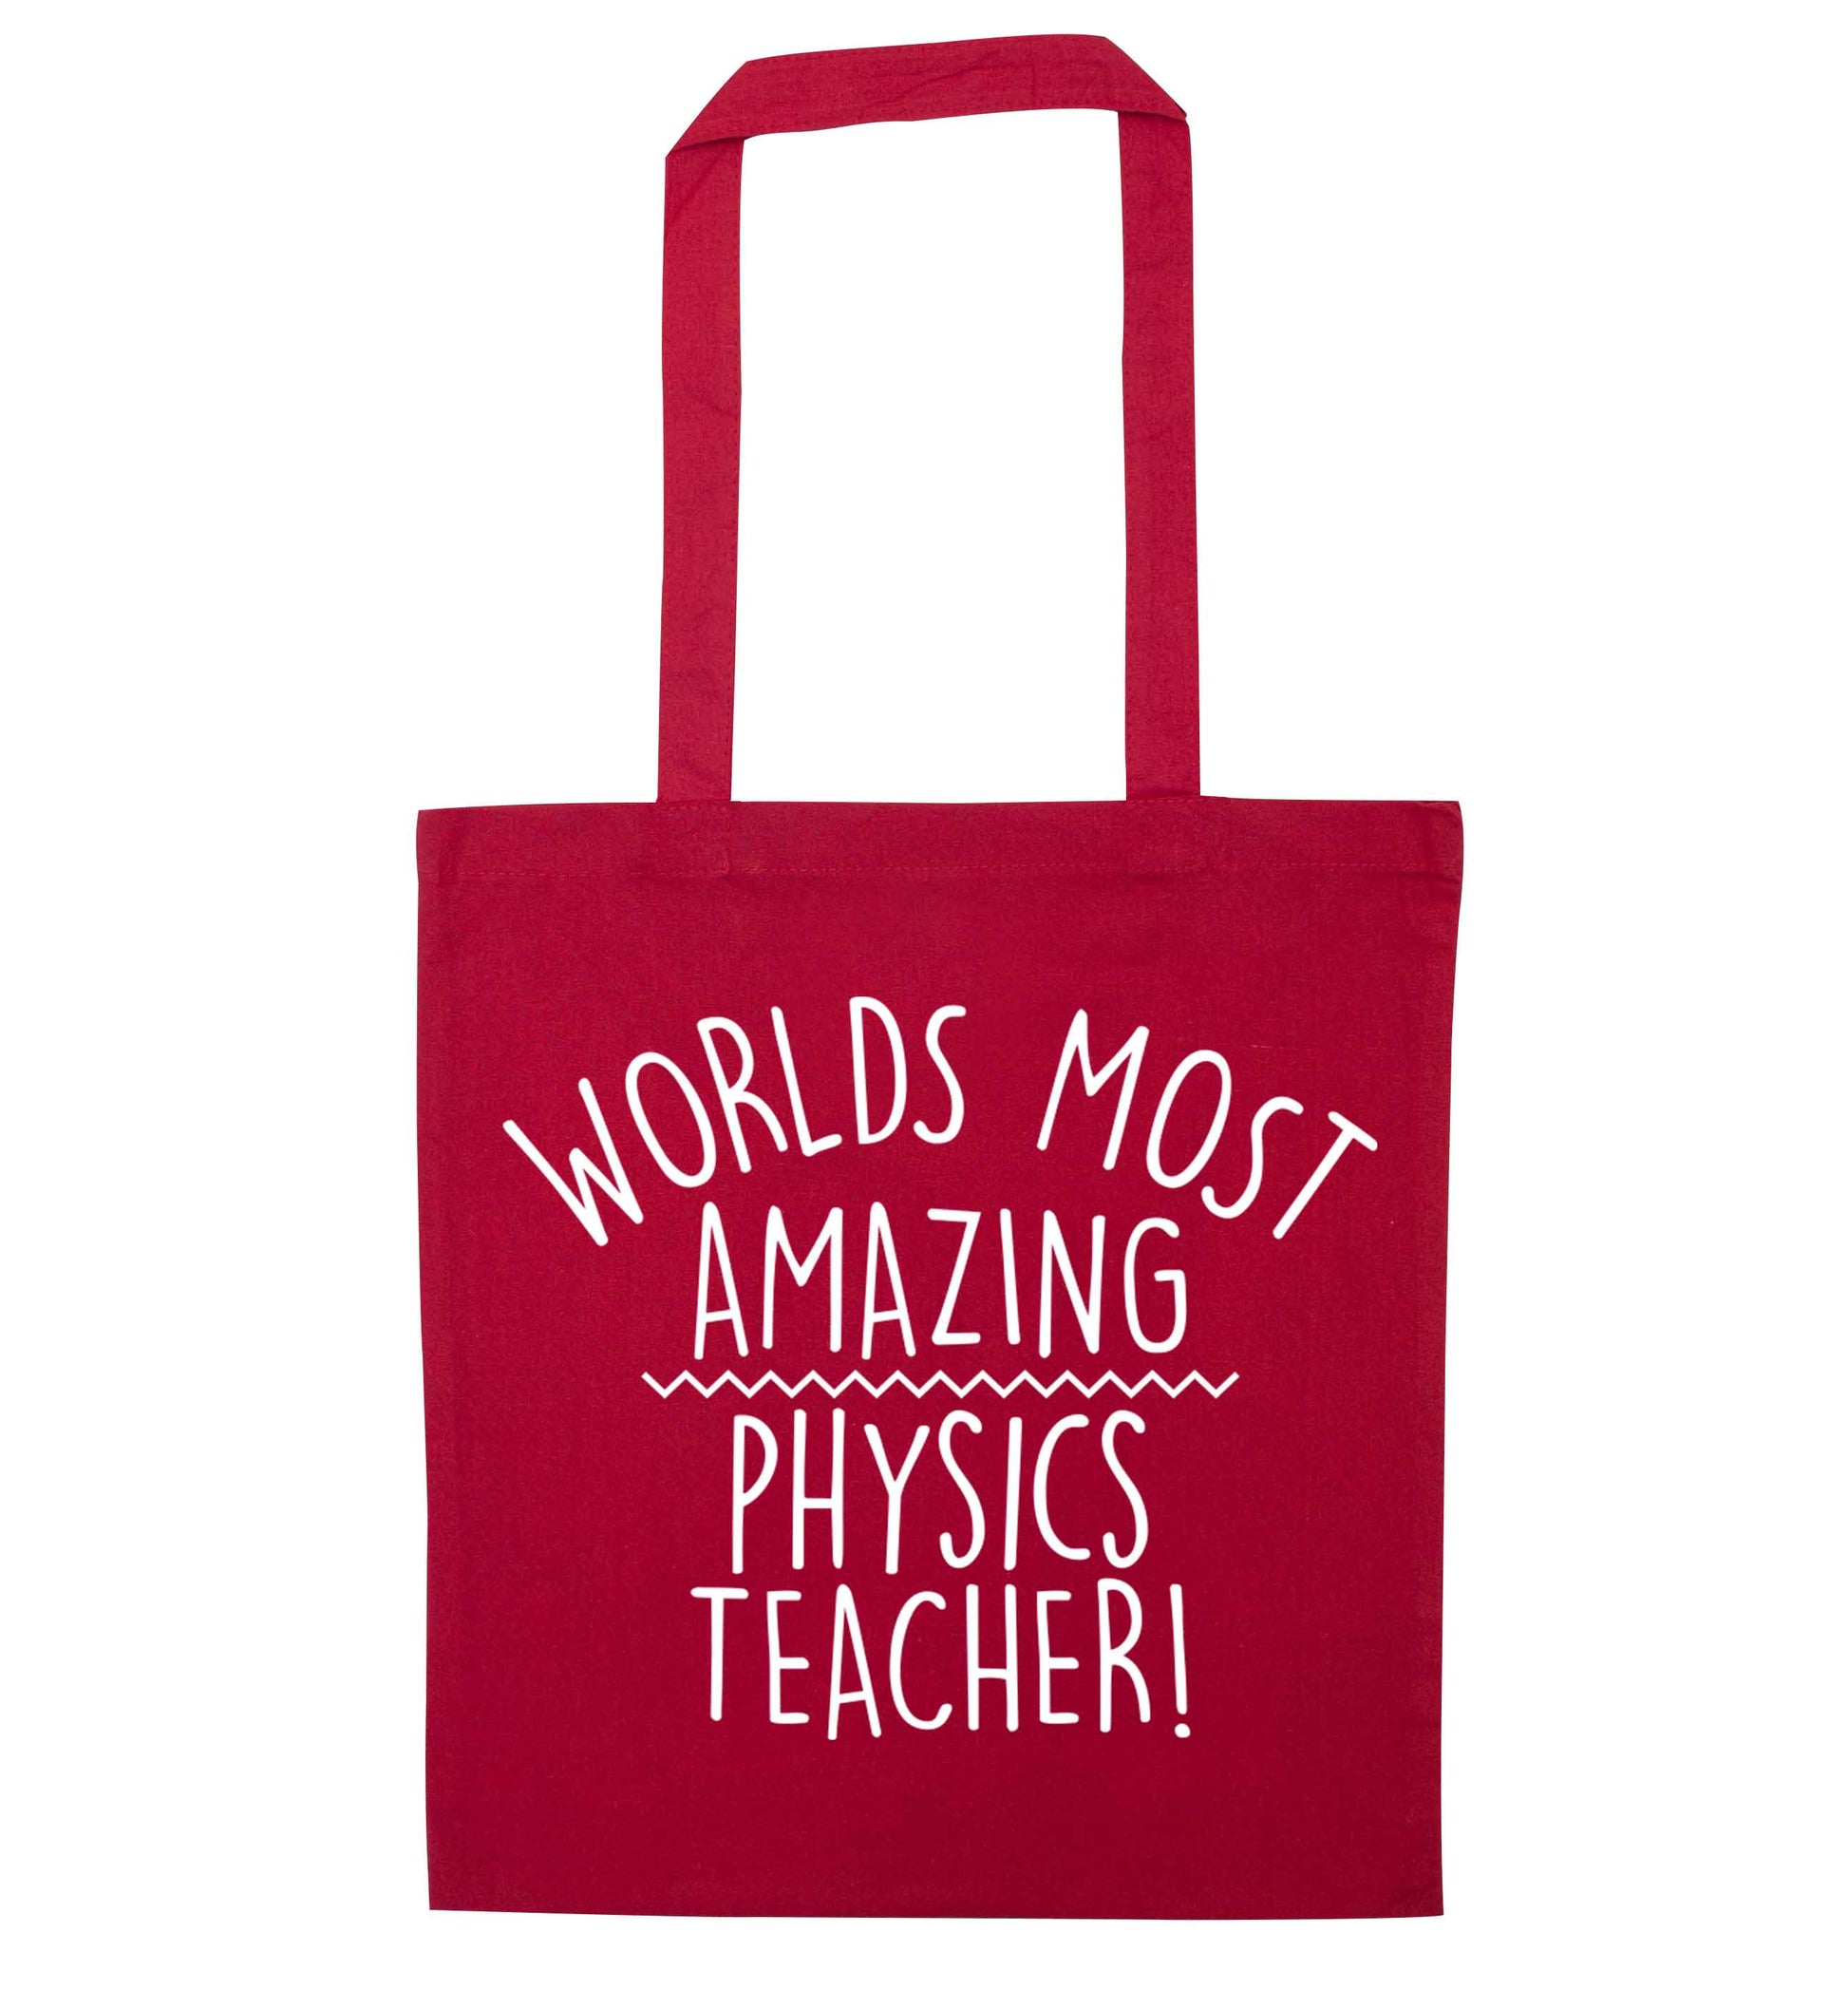 Worlds most amazing physics teacher red tote bag